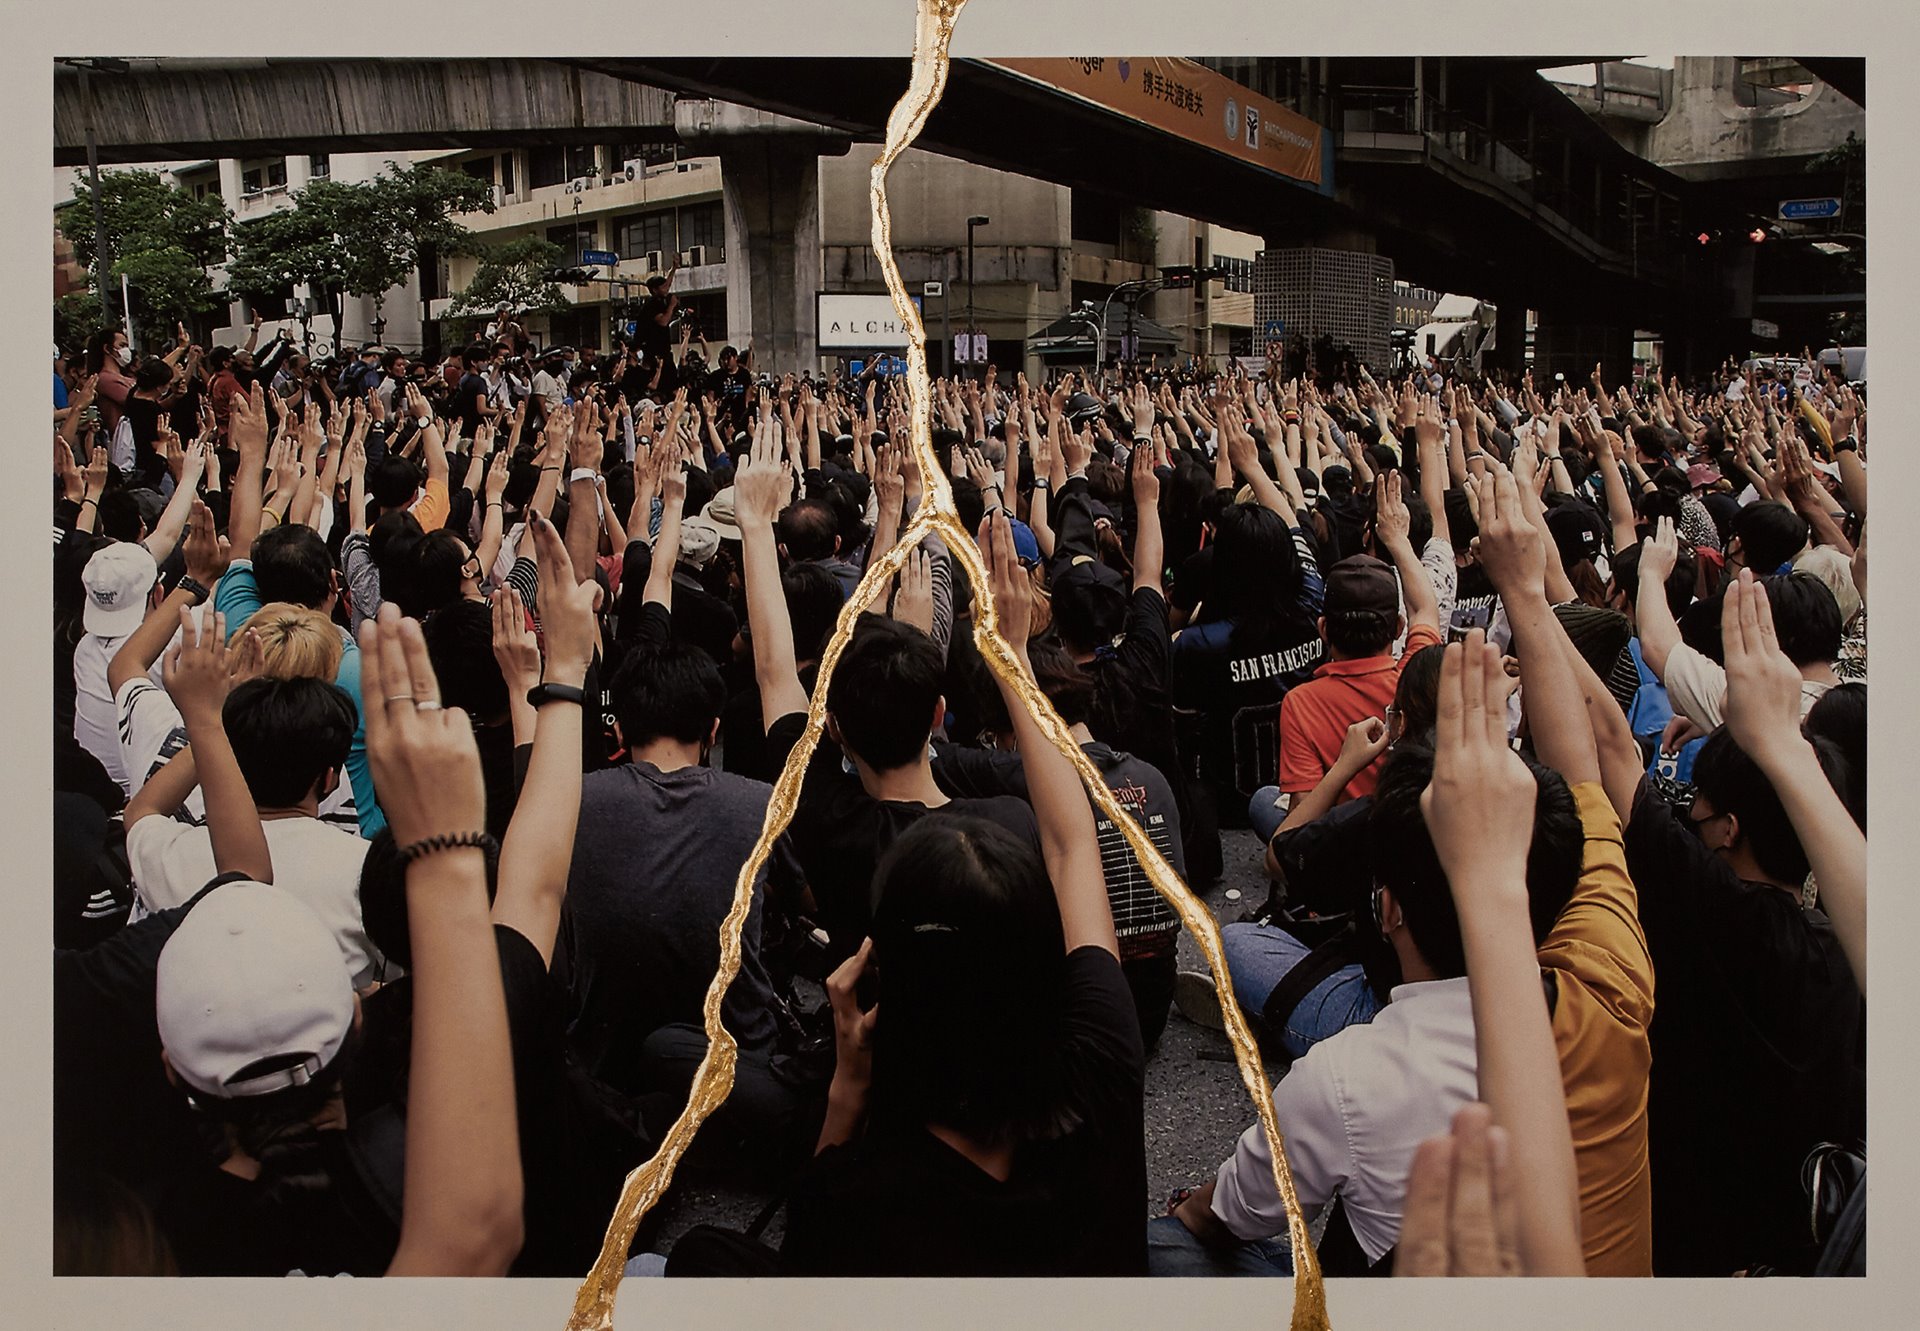 <p>Protesters make a three-finger salute &ndash; popularized by the Hunger Games films &ndash; in Bangkok, Thailand, on 14 October 2020. In the films, the salute is a sign of resistance against the authoritarian regime, which drew comparisons with Thailand&rsquo;s military government. Authorities canceled screenings of the films and arrested people making the salute.</p>
